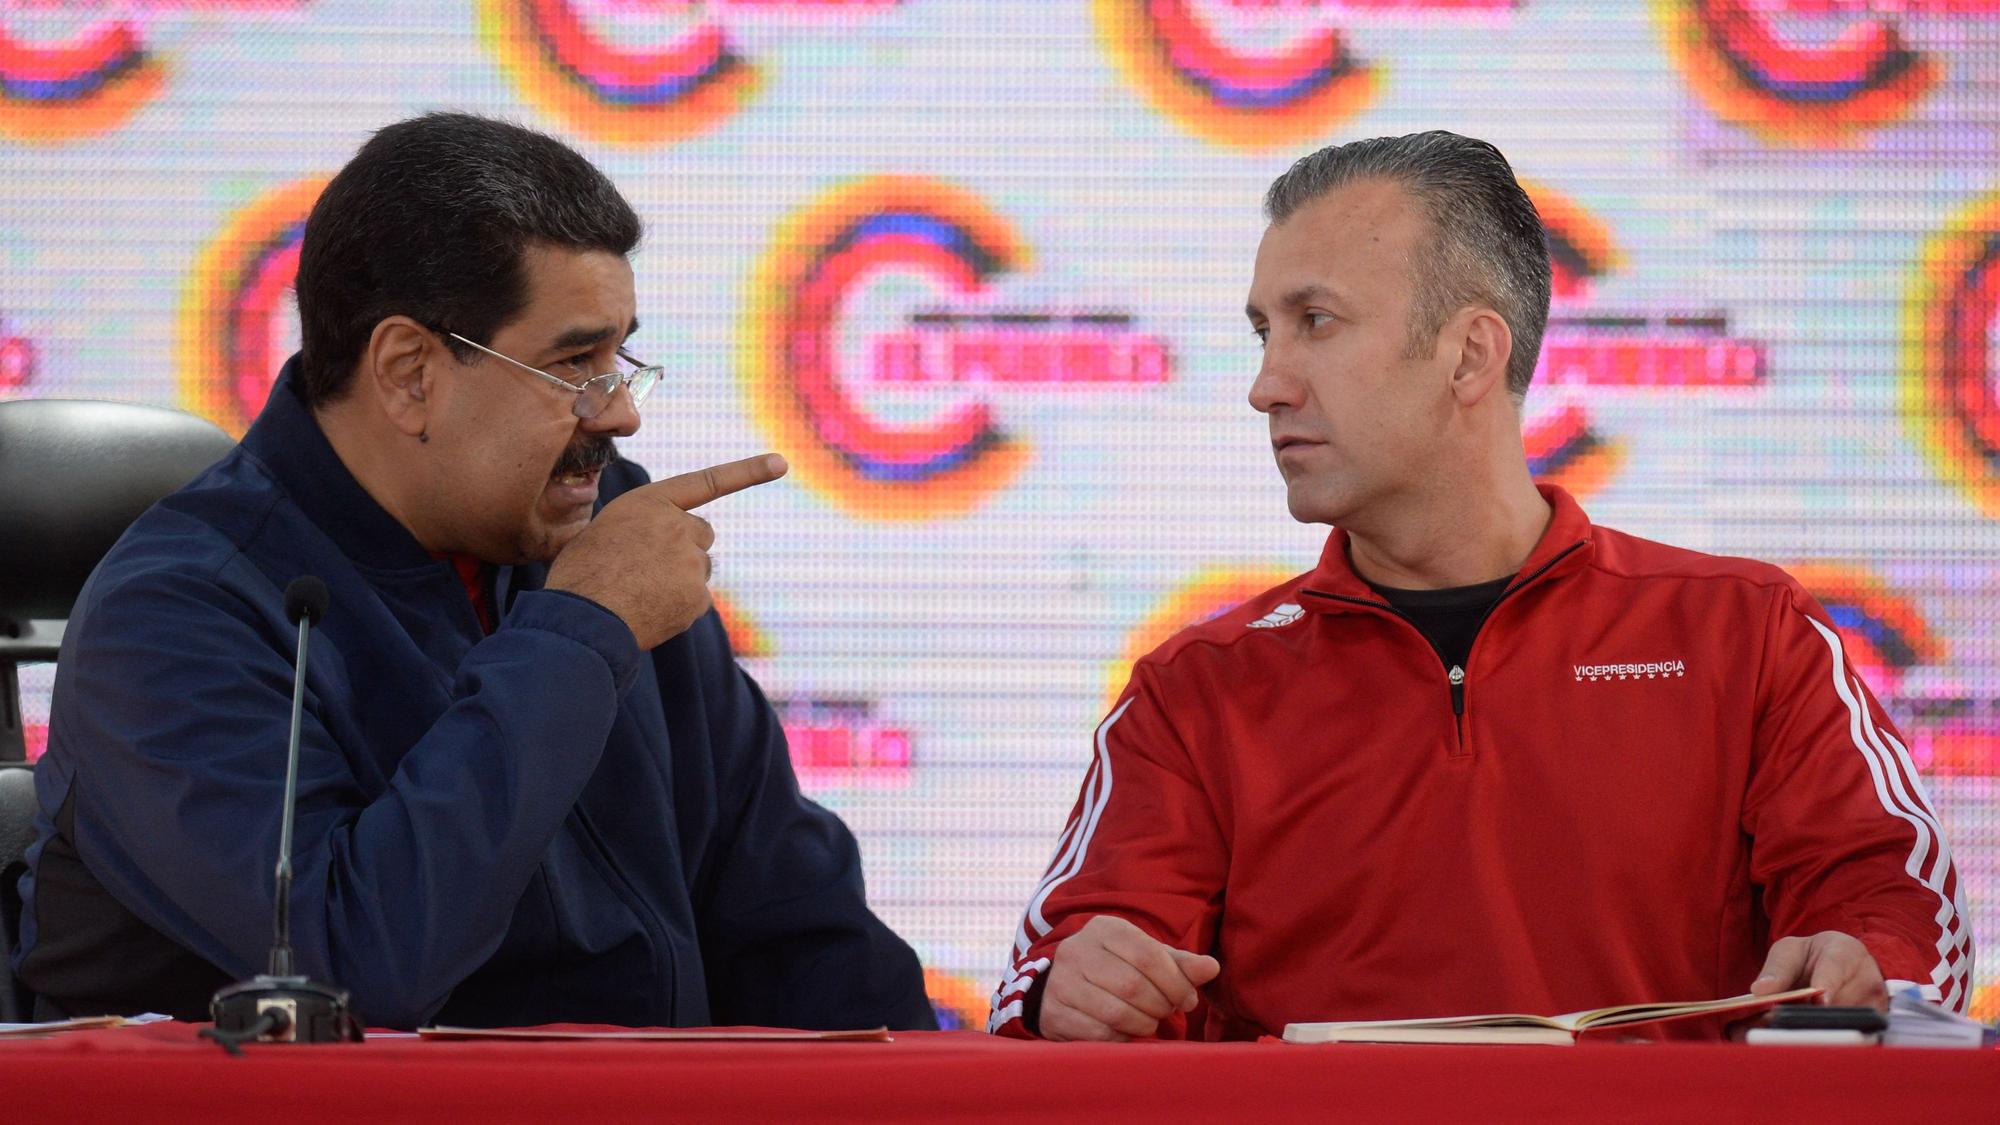 In this file photo taken on May 29, 2017, Venezuelan President Nicolas Maduro (L) talks with by Vice President Tareck El Aissami during the swearing in of the the members of the campaign command for the constituent assembly. - Venezuelan Oil Minister Tareck El Aissami resigned from his post on March 20, 2023, after a new investigation into corruption within the industry involving officials of state-owned PDVSA, for which a former manager has already been arrested, began over the weekend. (Photo by FEDERICO PARRA / AFP)